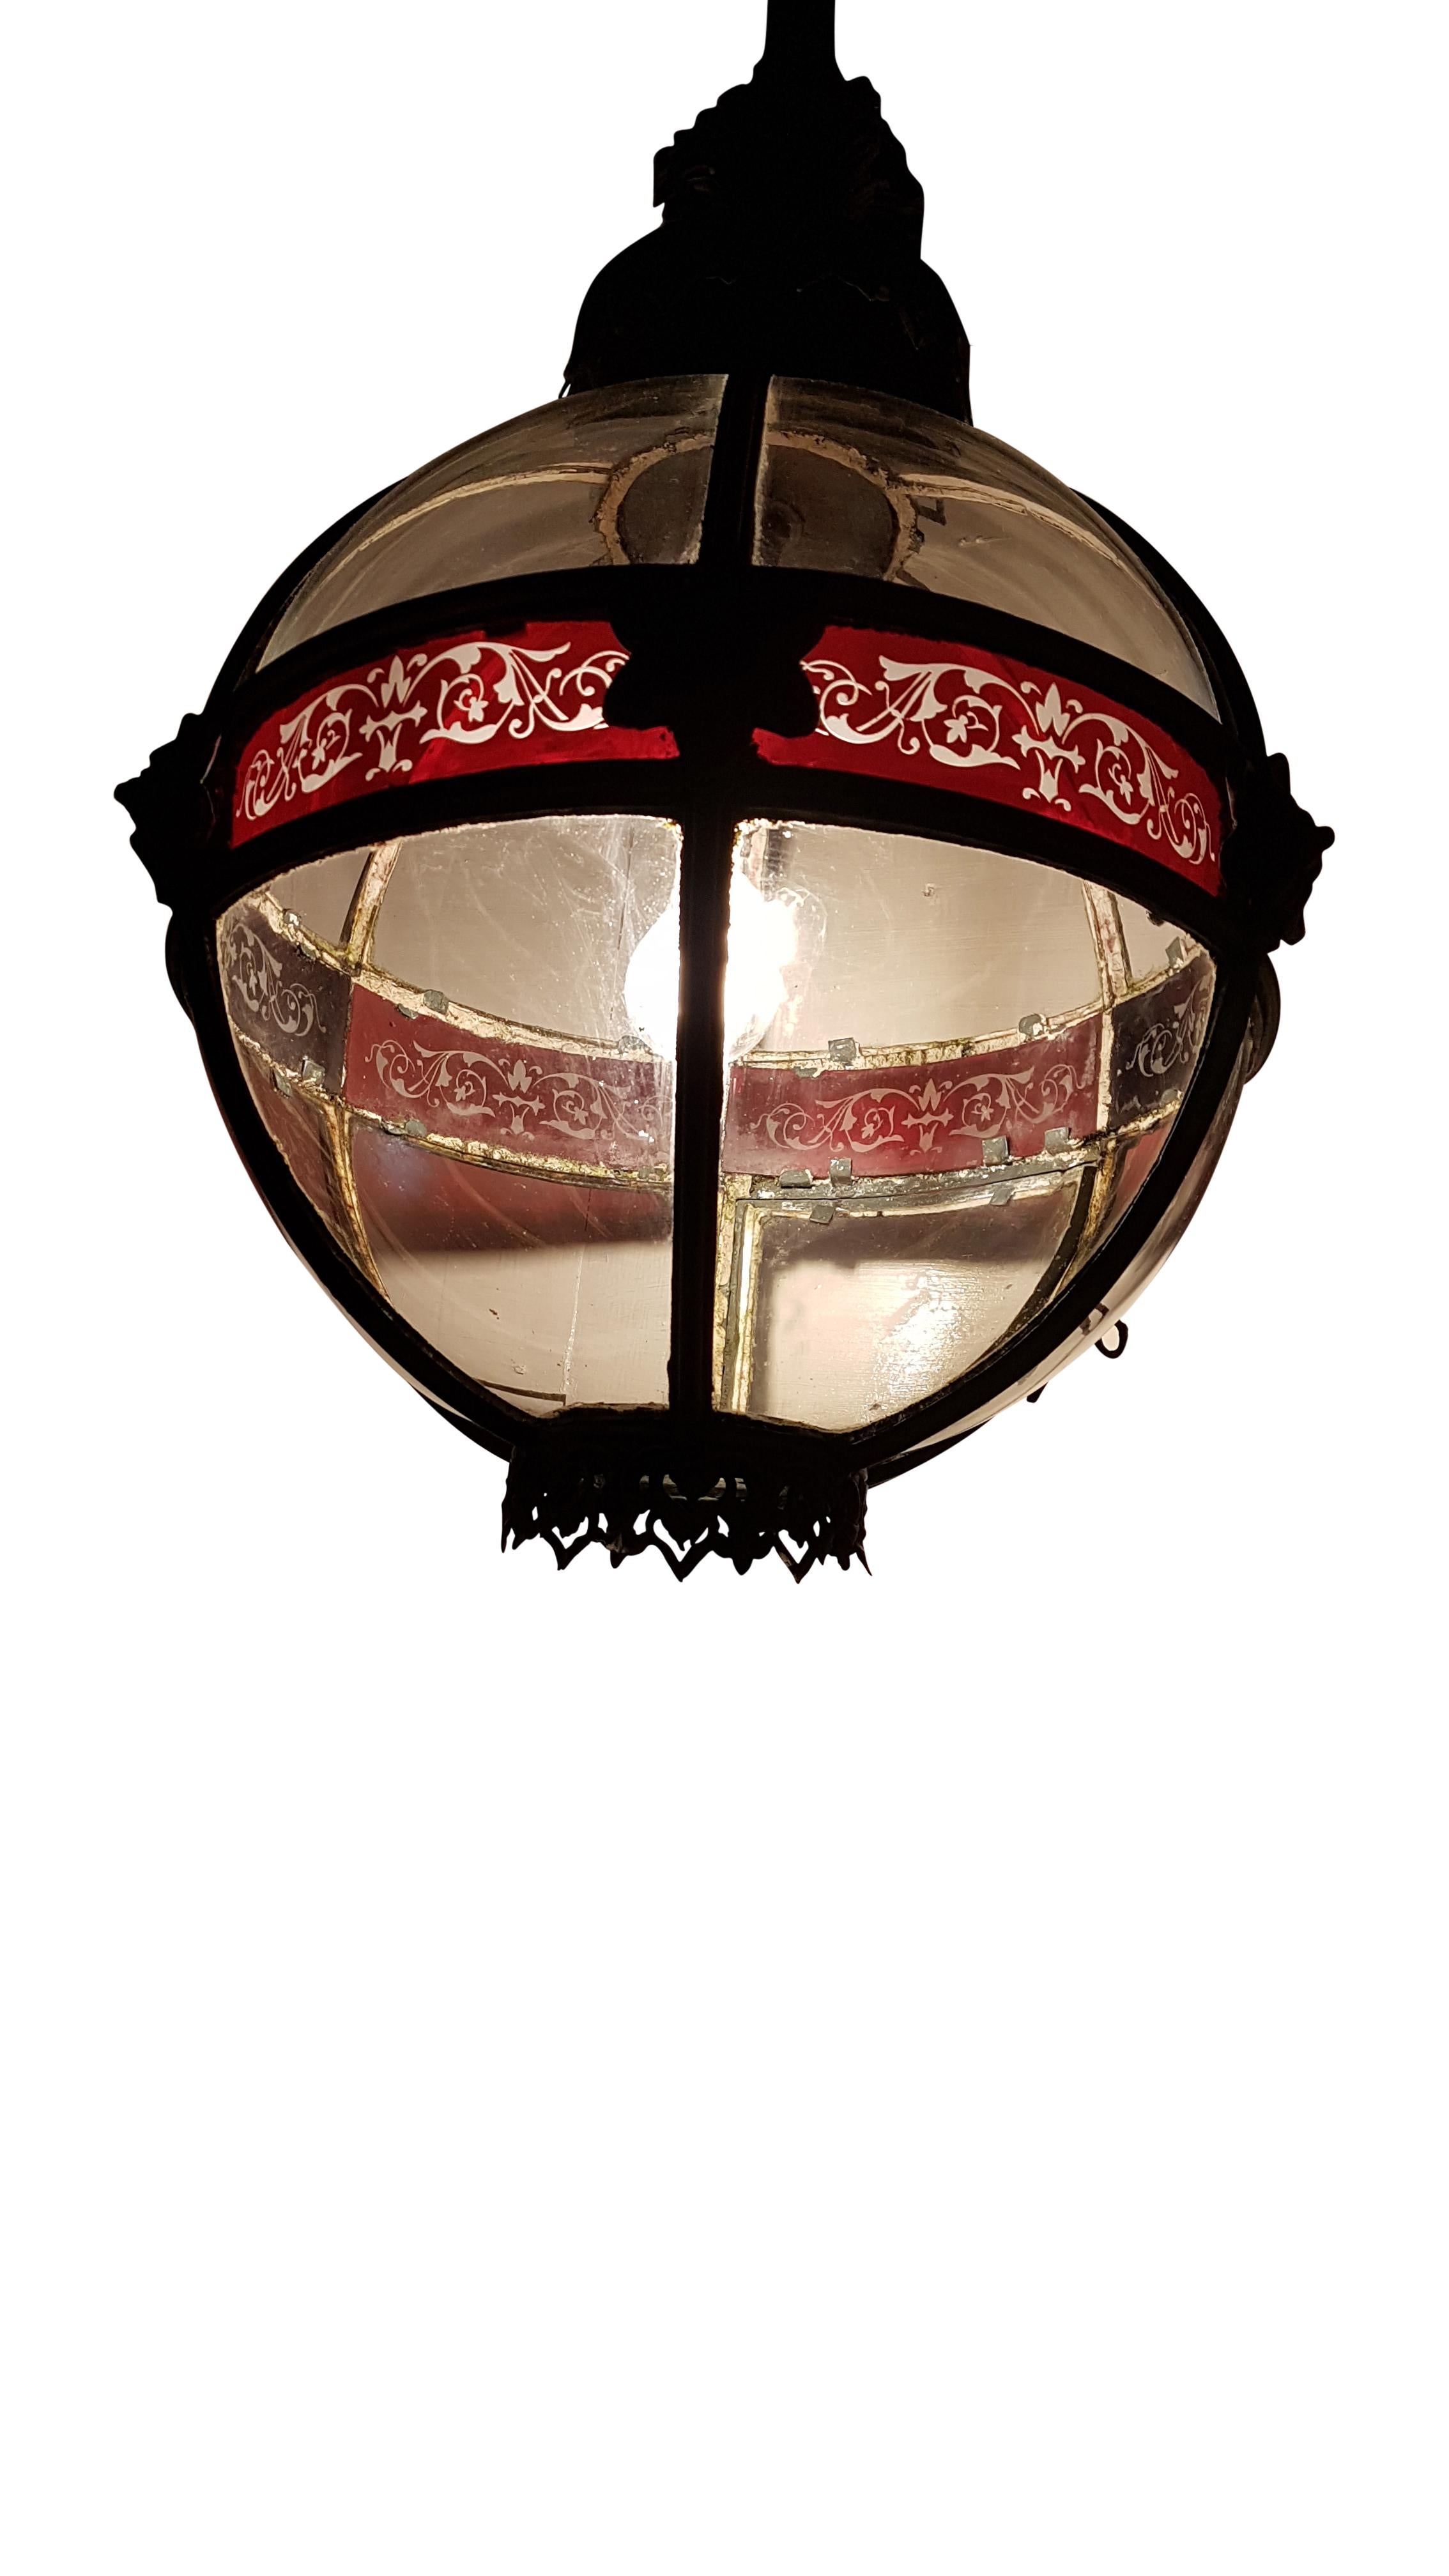 Original 19th Century Copper Globe Lantern Reputedly from Palace of Westminster 9